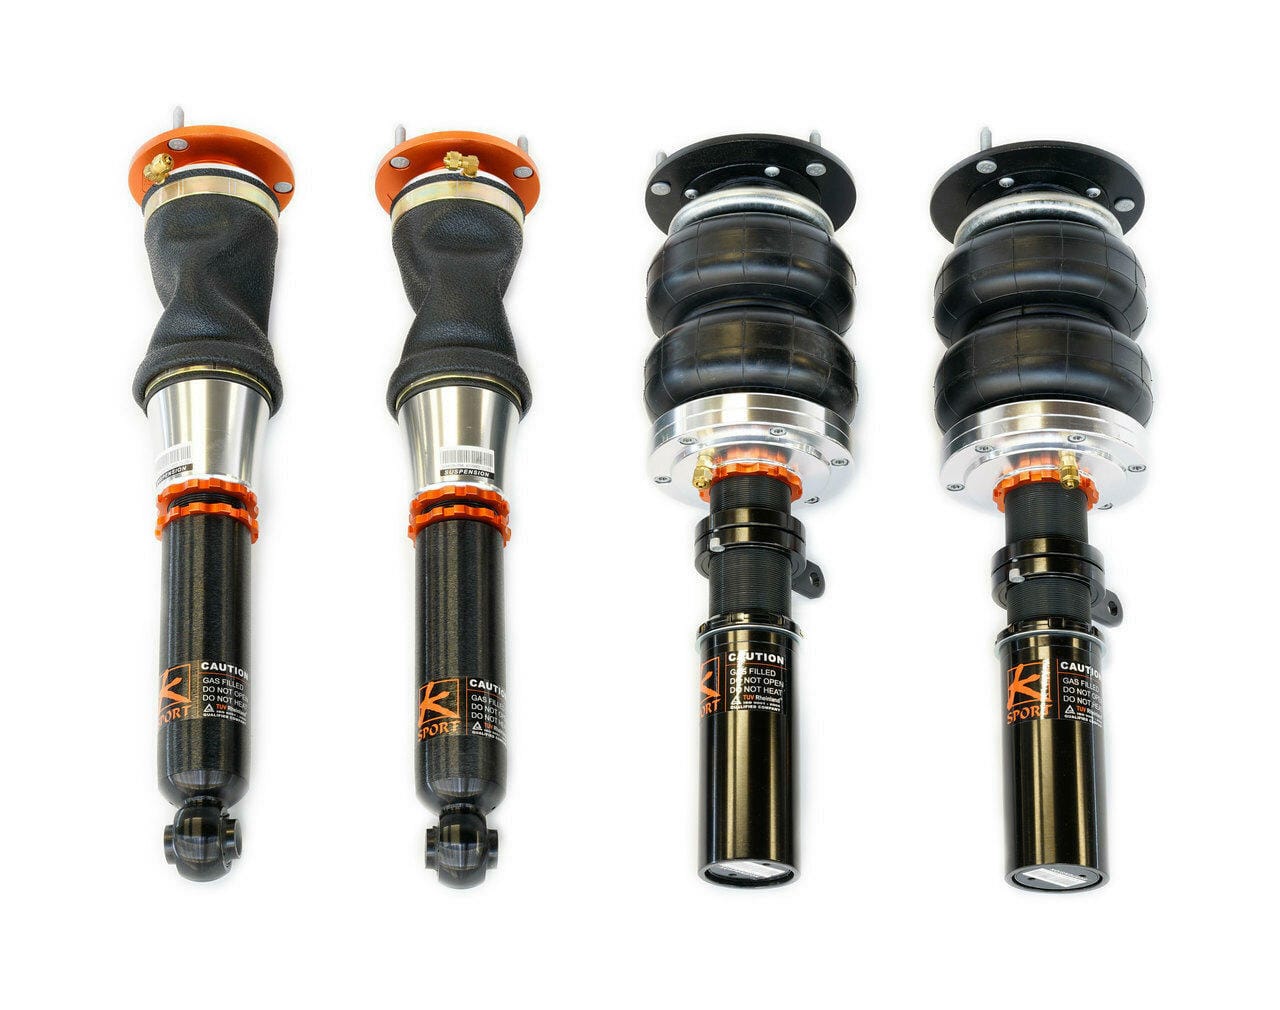 Ksport Airtech Air Suspension System (Struts Only) - 1989-1995 BMW 5 Series 525i, 530i, 535i, 540i w/ 55mm OE Front Strut Weld-In (E34) CBM201-ASO